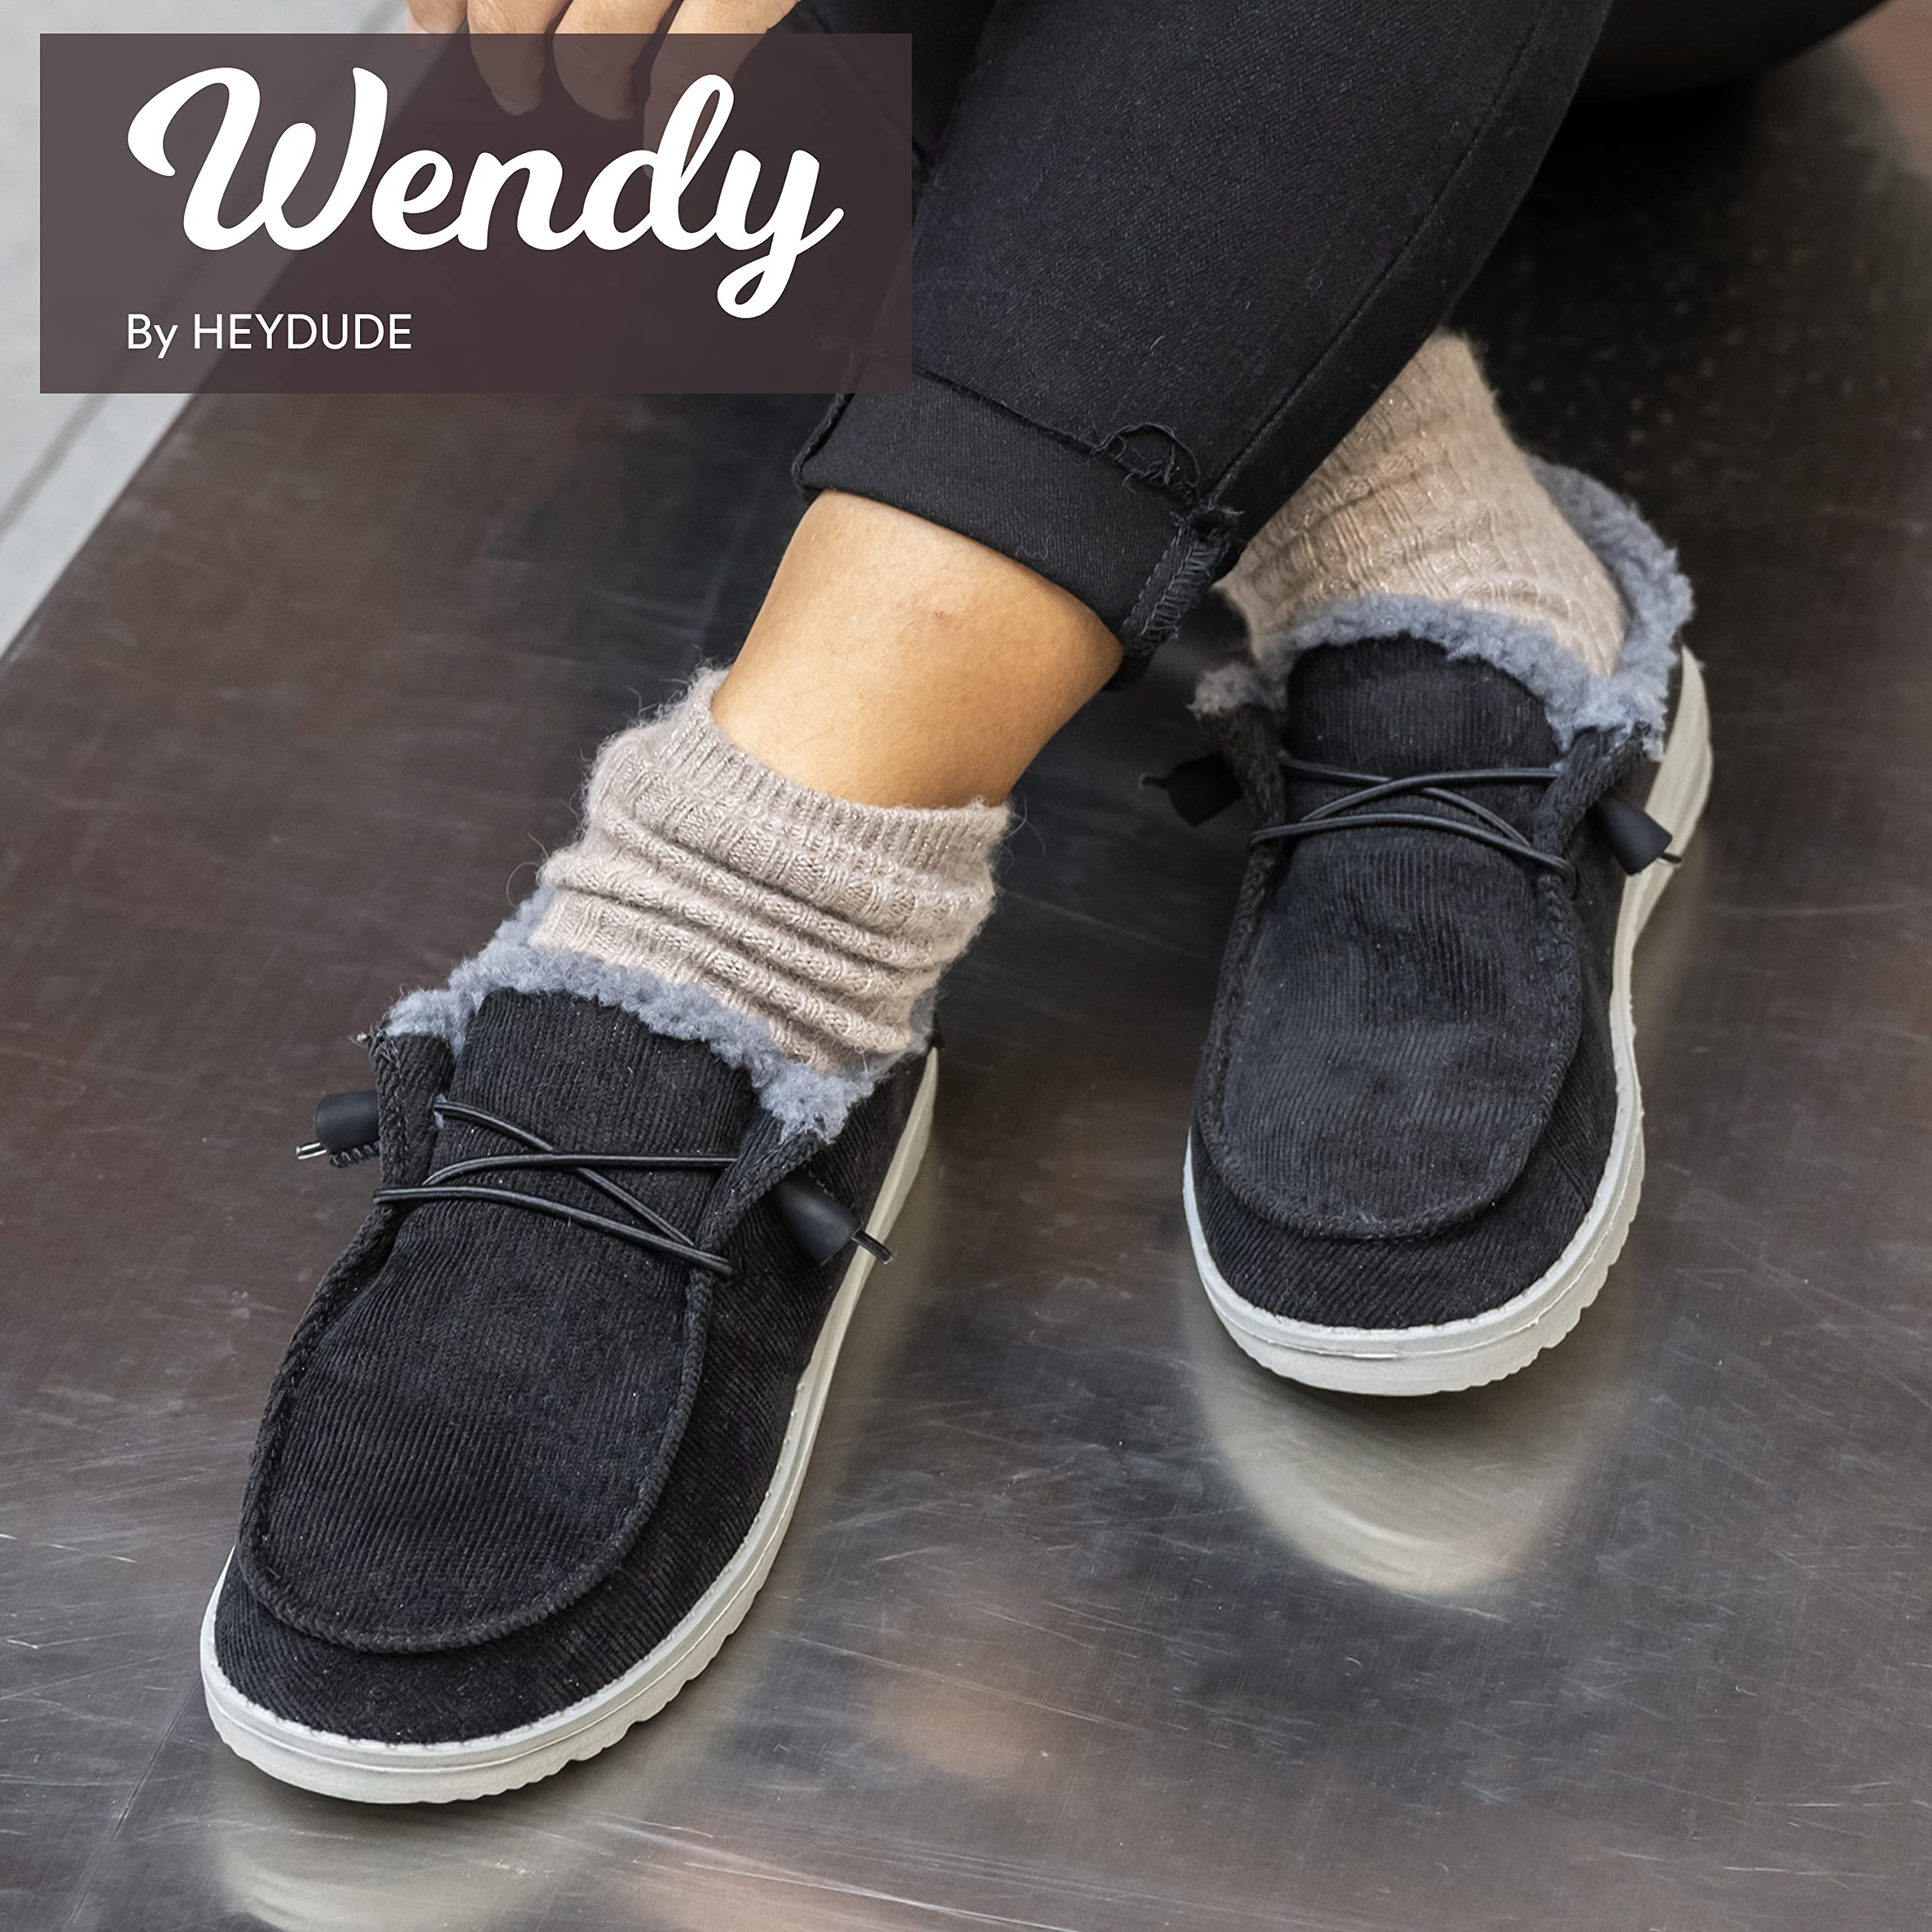 Buy Hey Dude Women's Wendy Lace-Up Loafers Comfortable